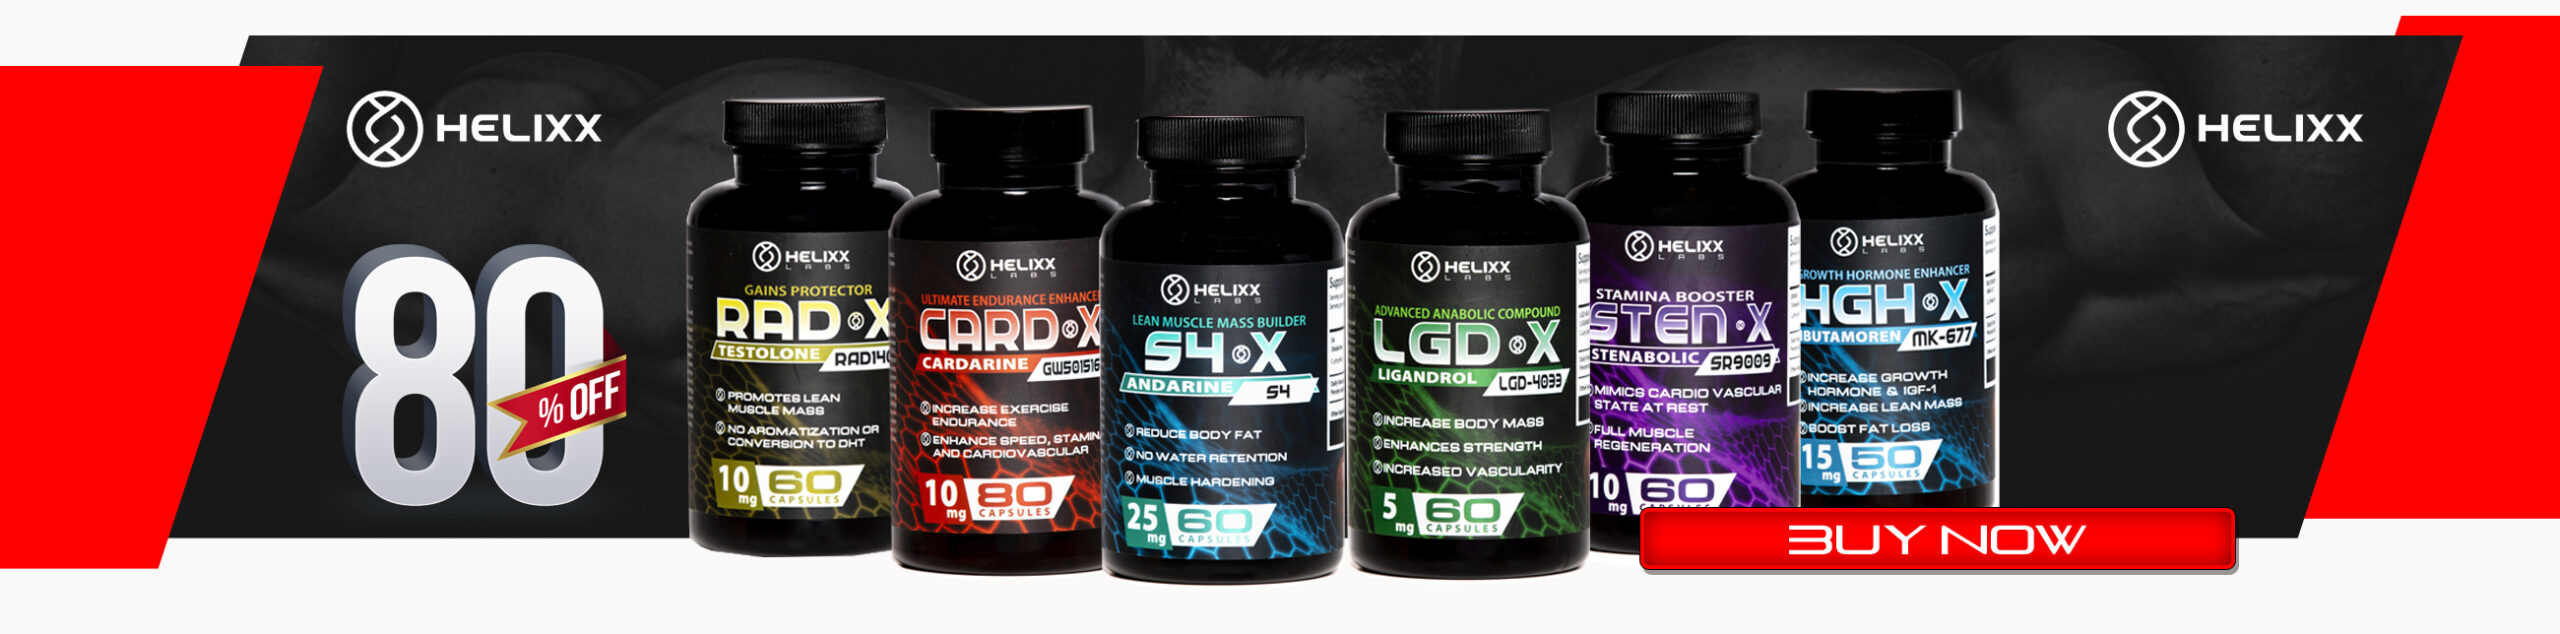 Helixx SARMS | Canadian Anabolics | Best SARMS in Canada